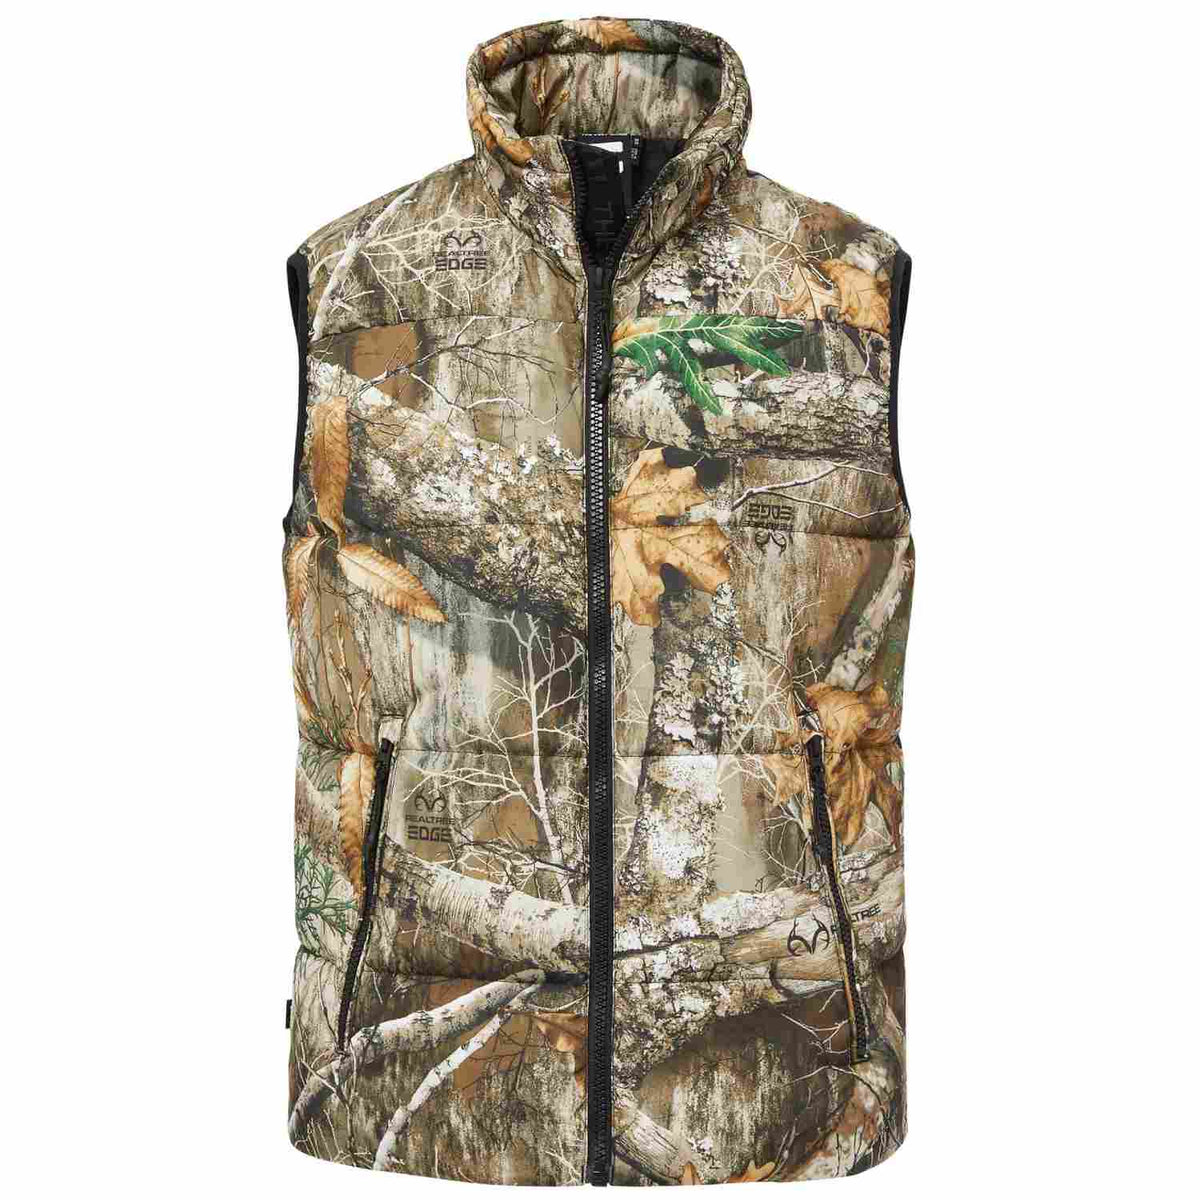  The Very Warm - Camo Poly Filled Puffer Vest